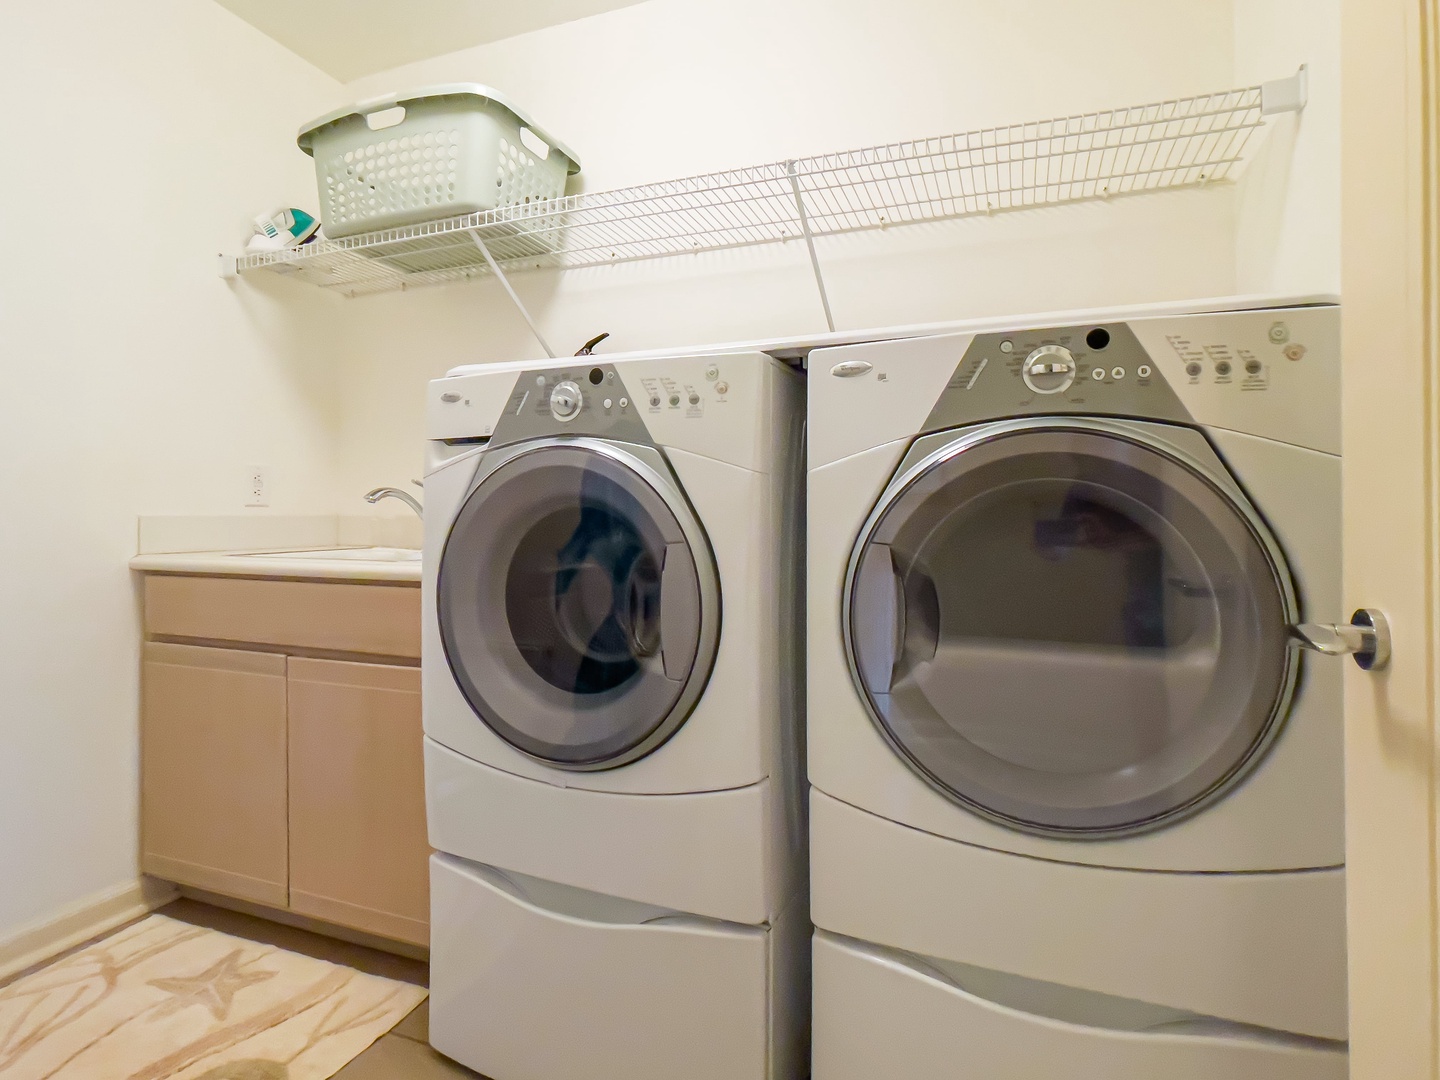 Kamuela Vacation Rentals, The Islands D3 - Spacious & Convenient Downstairs Laundry Room w/ Iron & Ironing Board